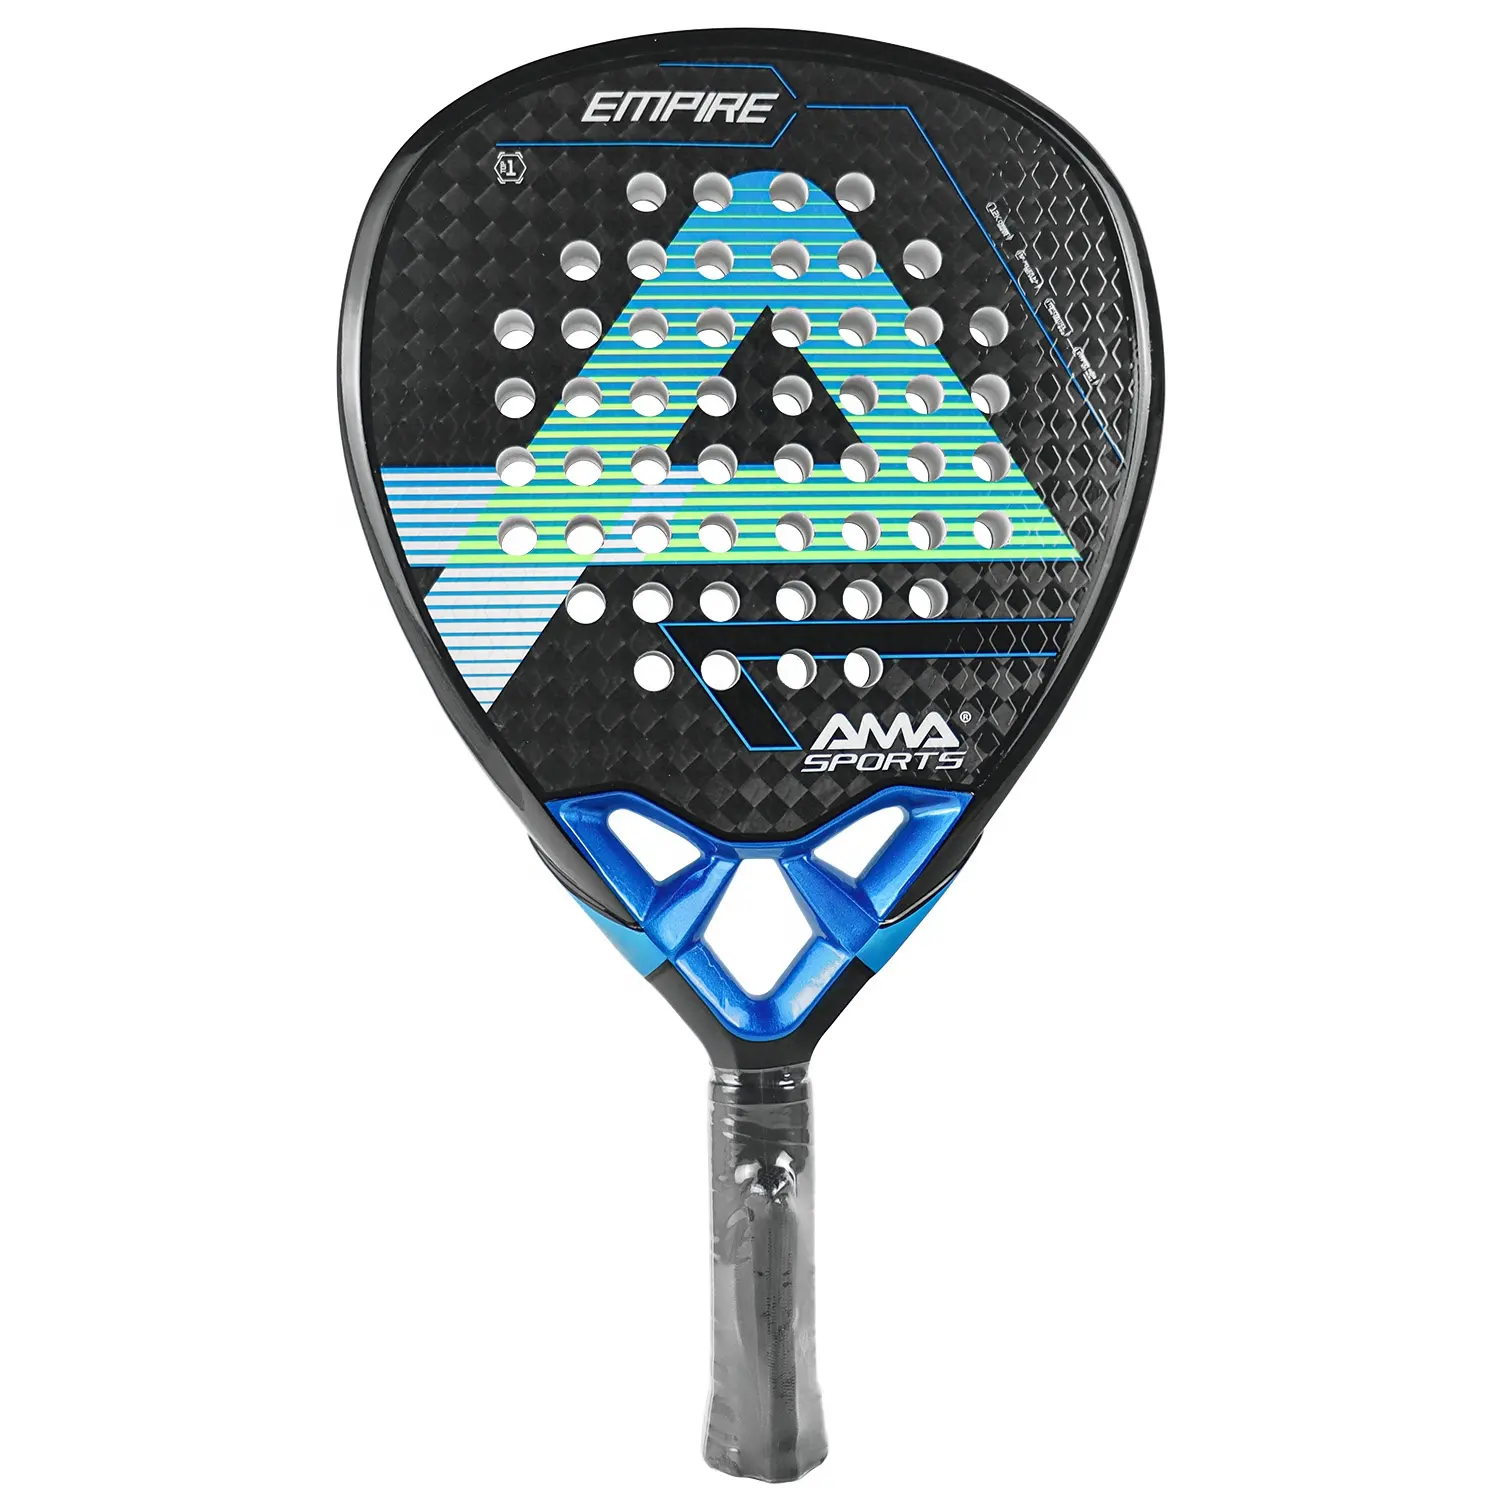 AMA SPORT Top Ranked Quality CN Manufacturer Directly Custom Brand Carbon Padel Racket Tennis Paddle Racket